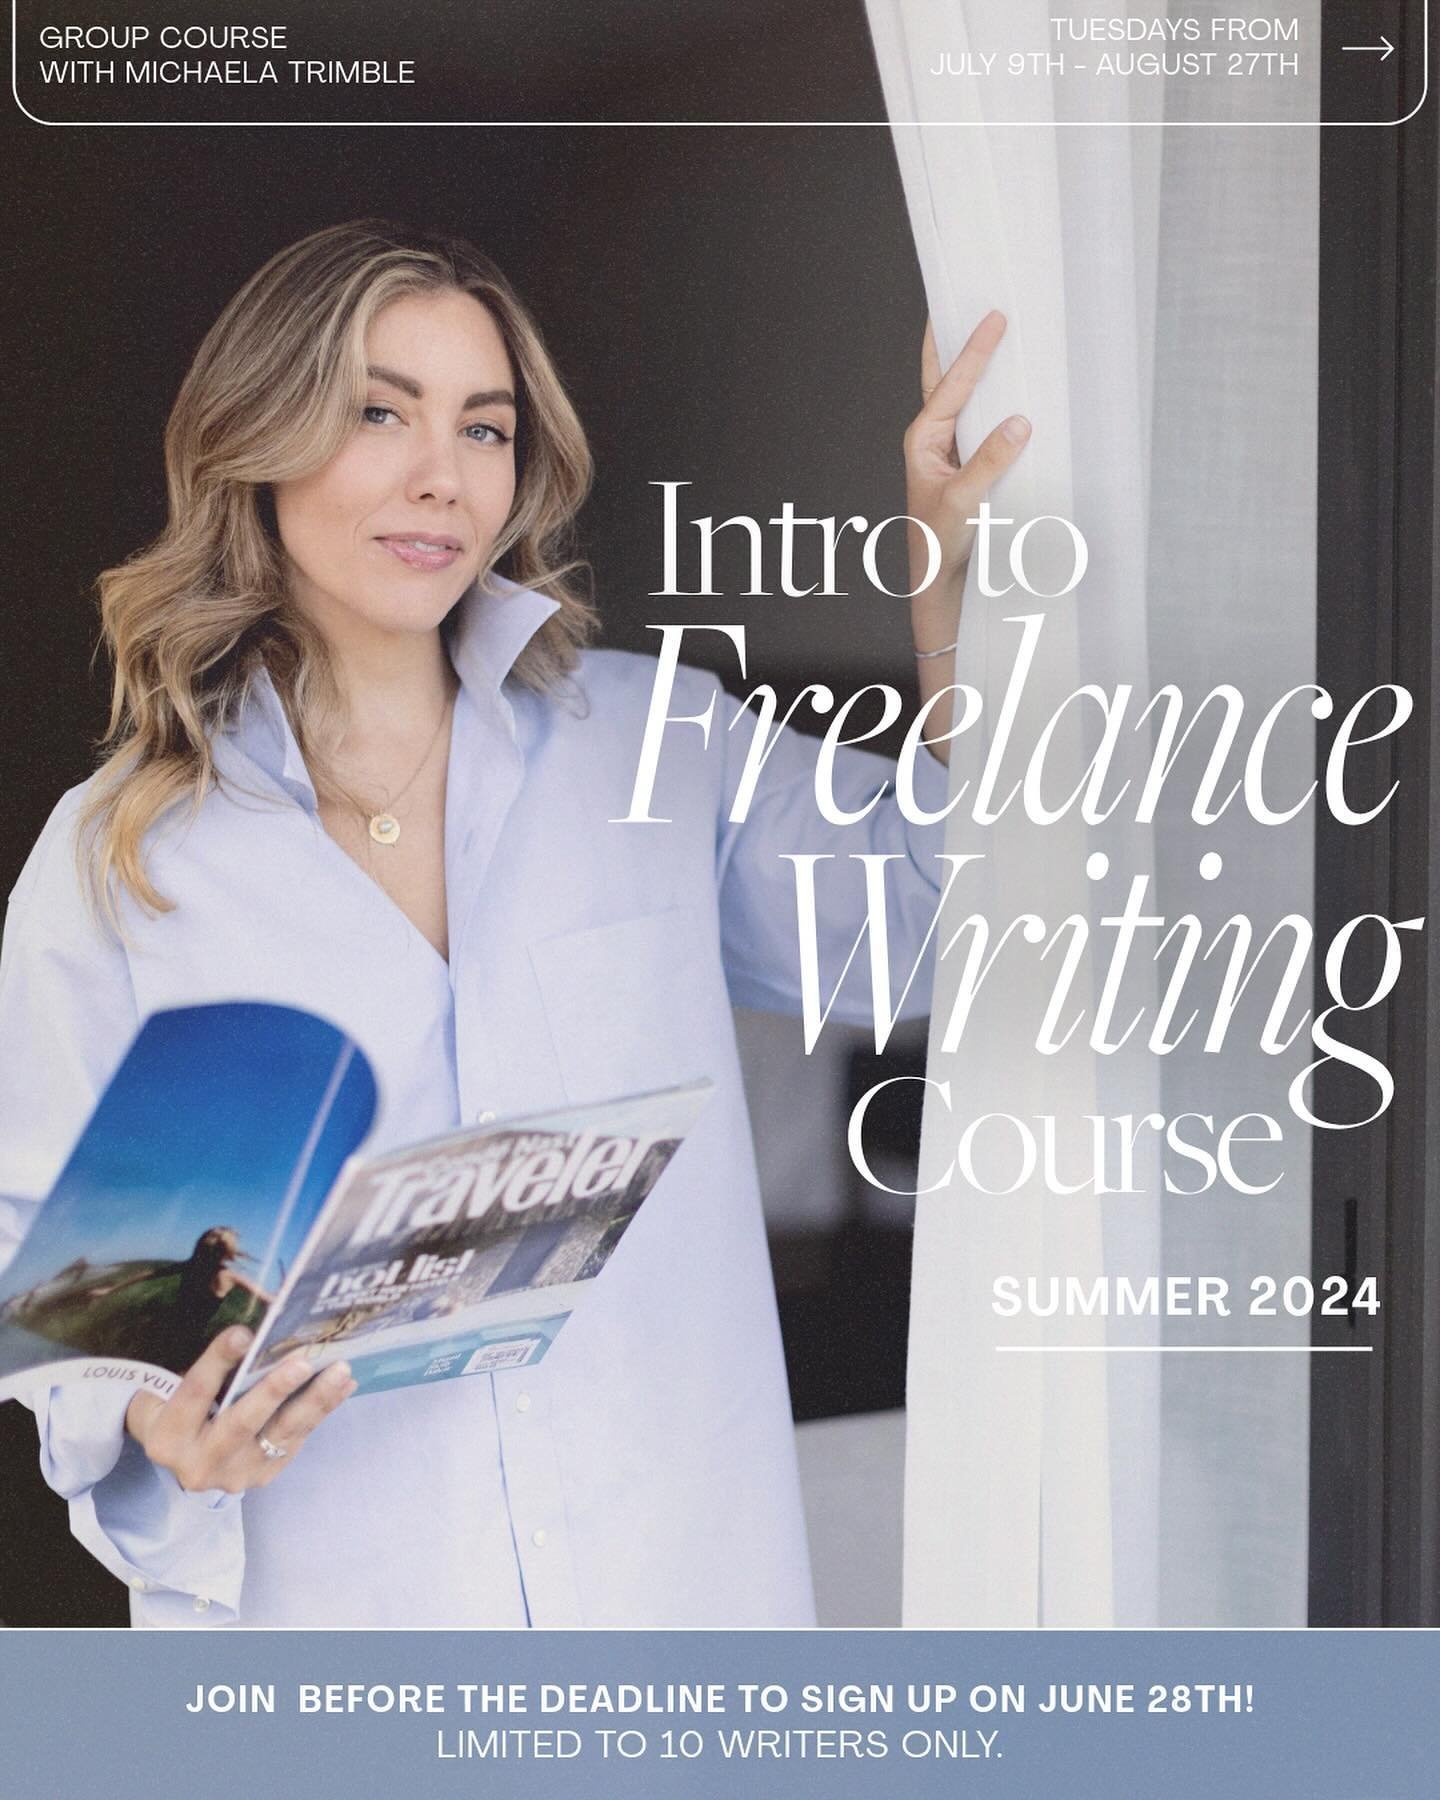 Summer school is back in session! The Summer 2024 Intro to Freelance Writing course officially begins on July 9th. 😎

More than a freelance writing course, this eight-week experience is the coalescence of the last 10+ years of my life. I have a trie